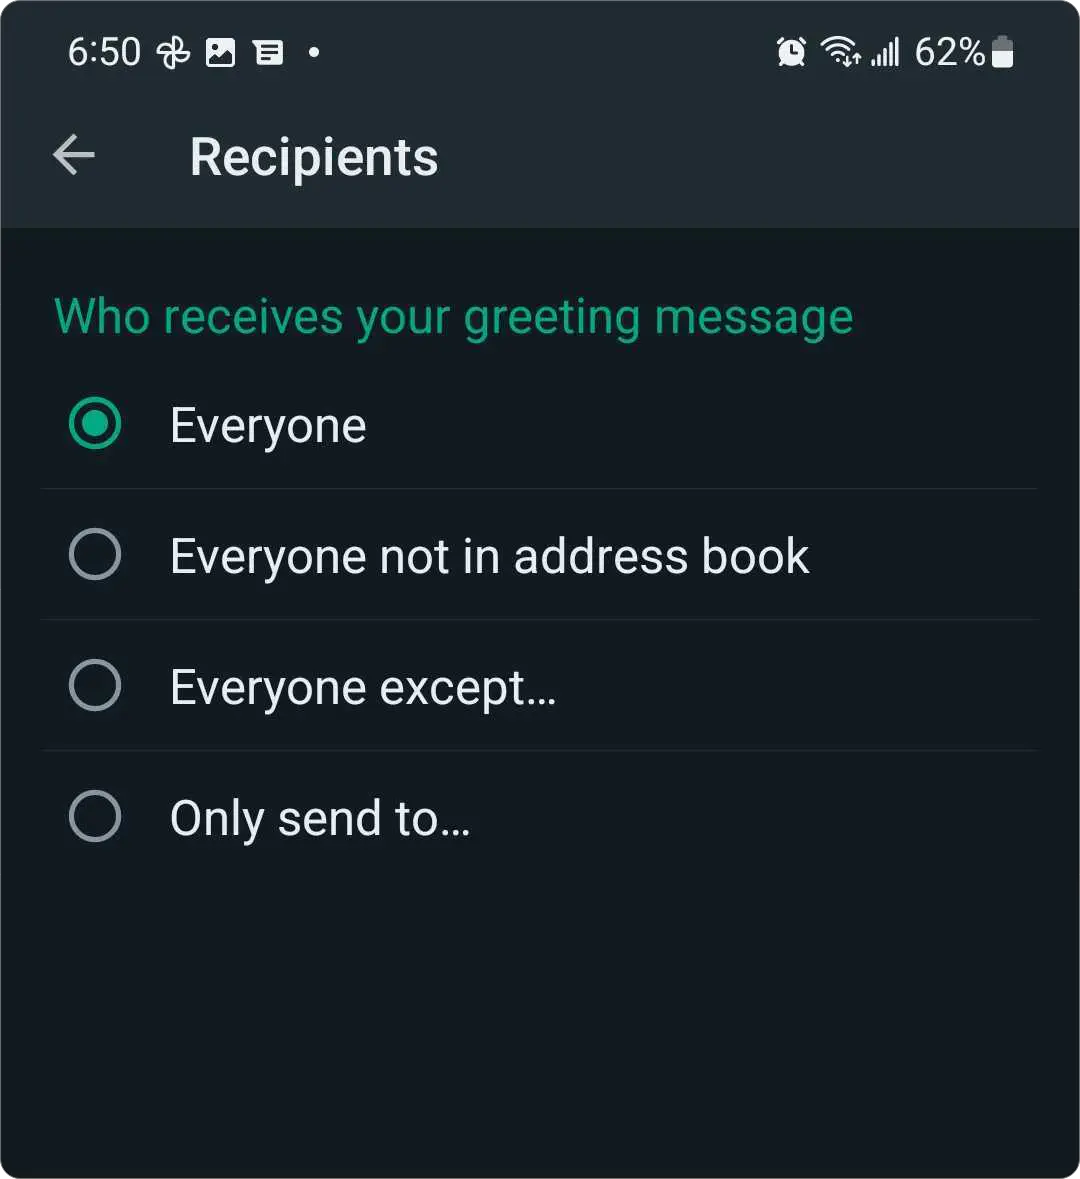 Sellecting who receives greeting messages.